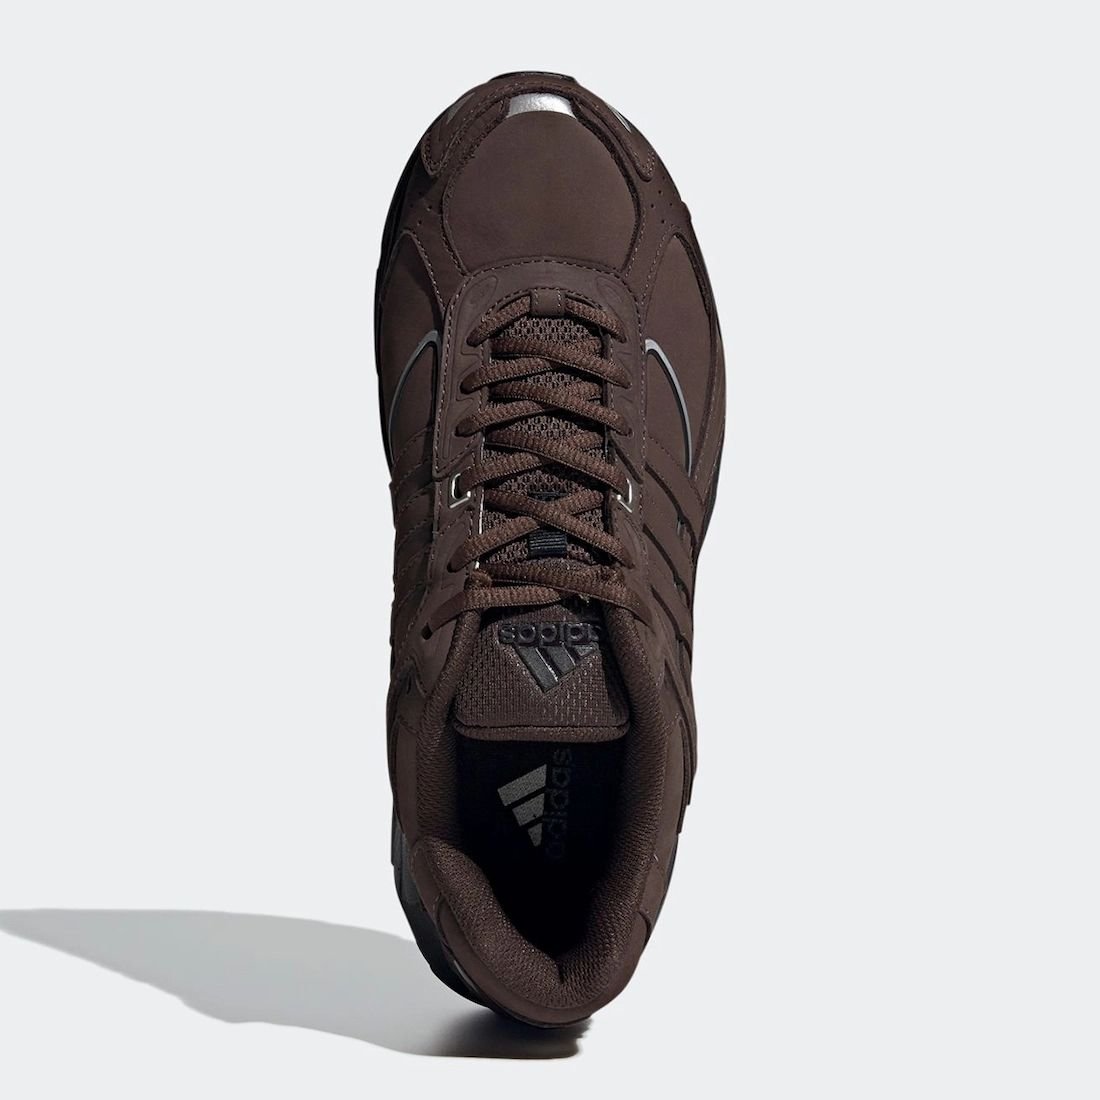 adidas Response CL Brown Black FX7727 Release Date Info